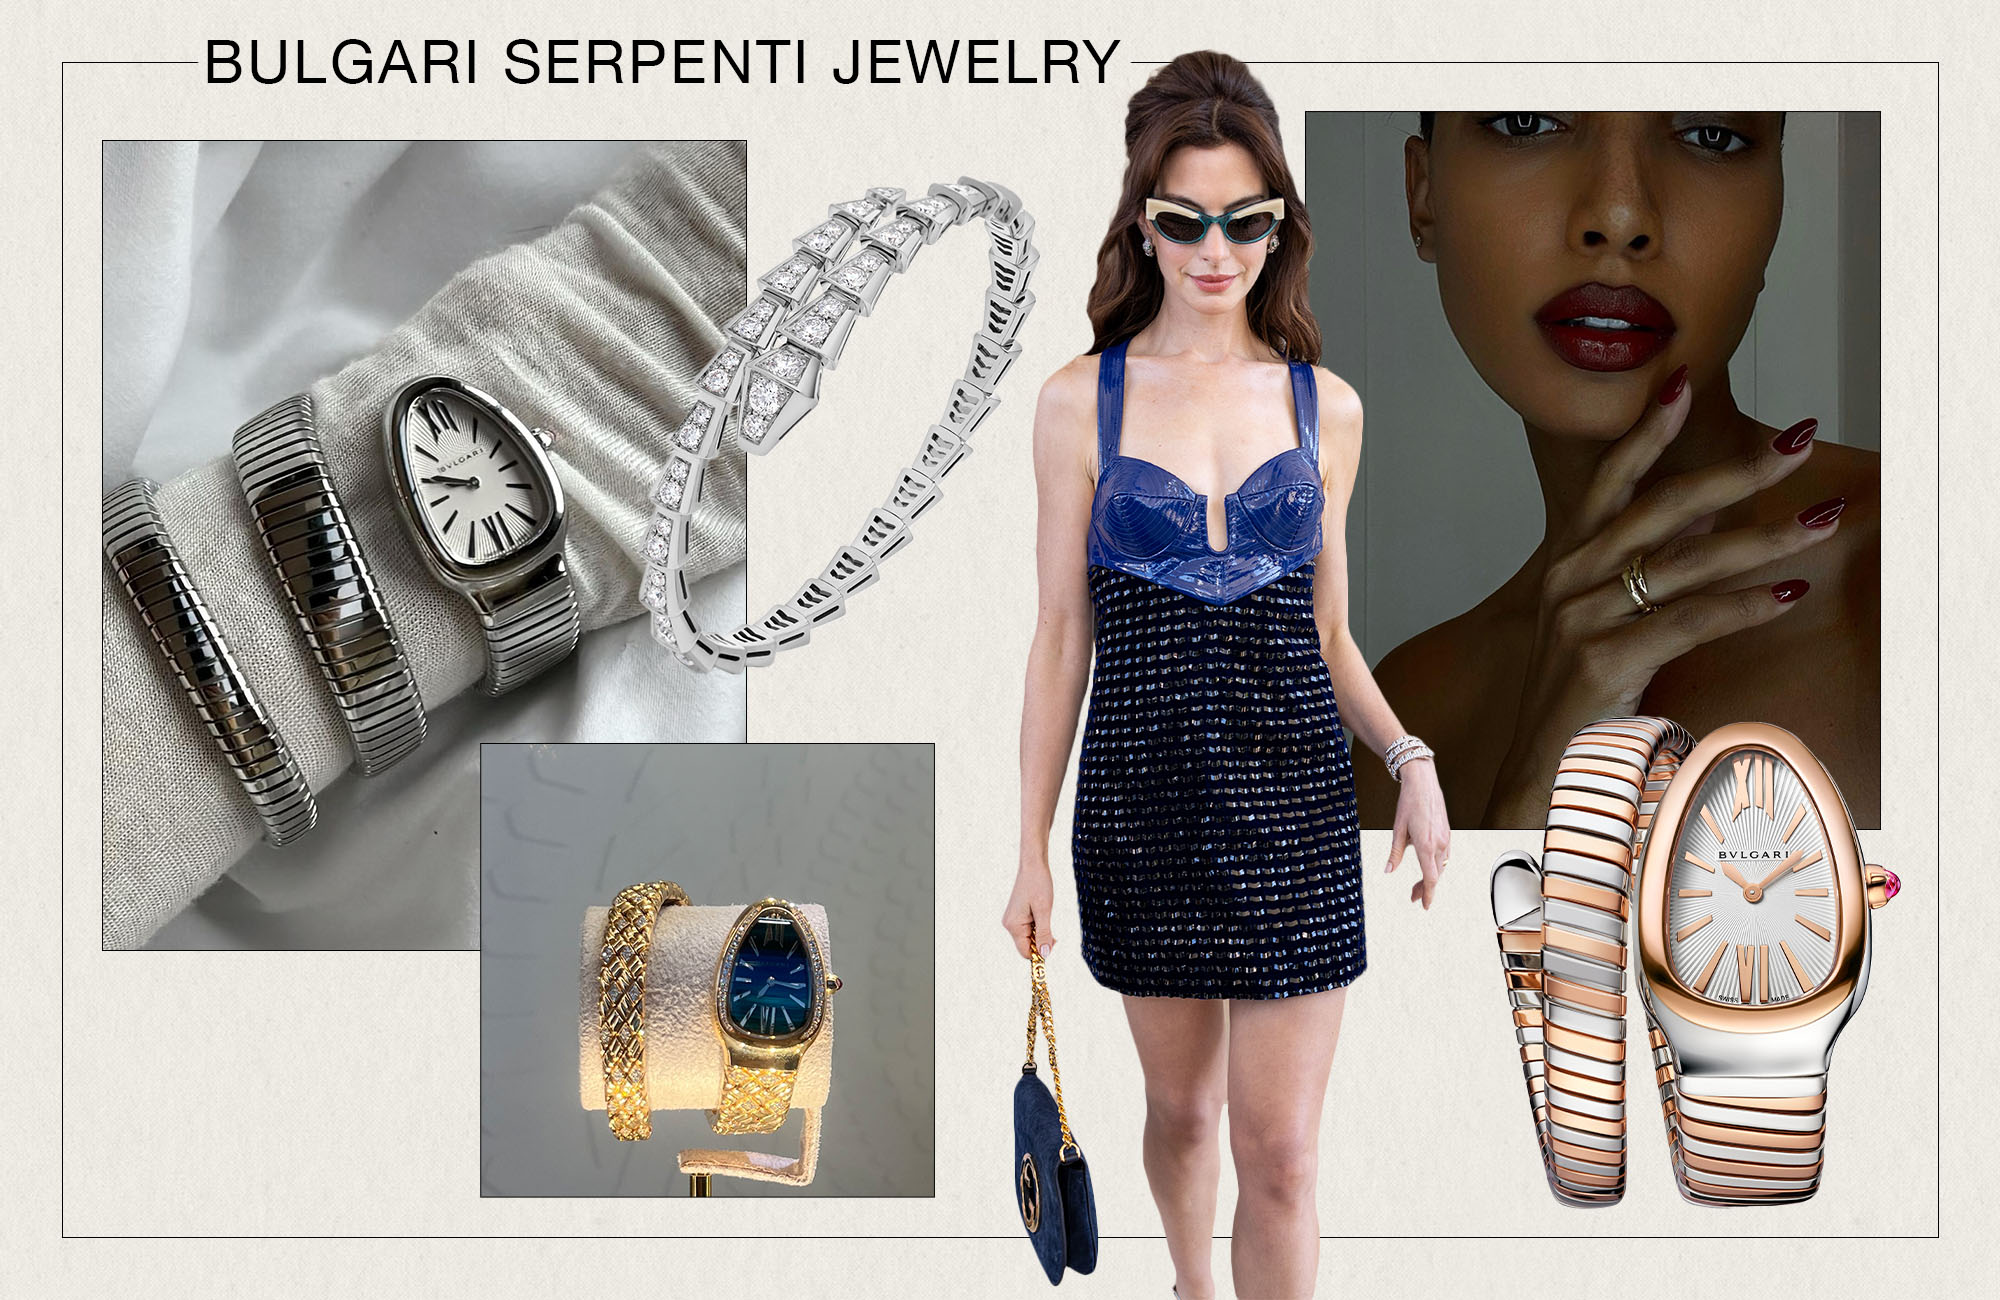 A collage of images of Bulgari Serpenti jewelry.